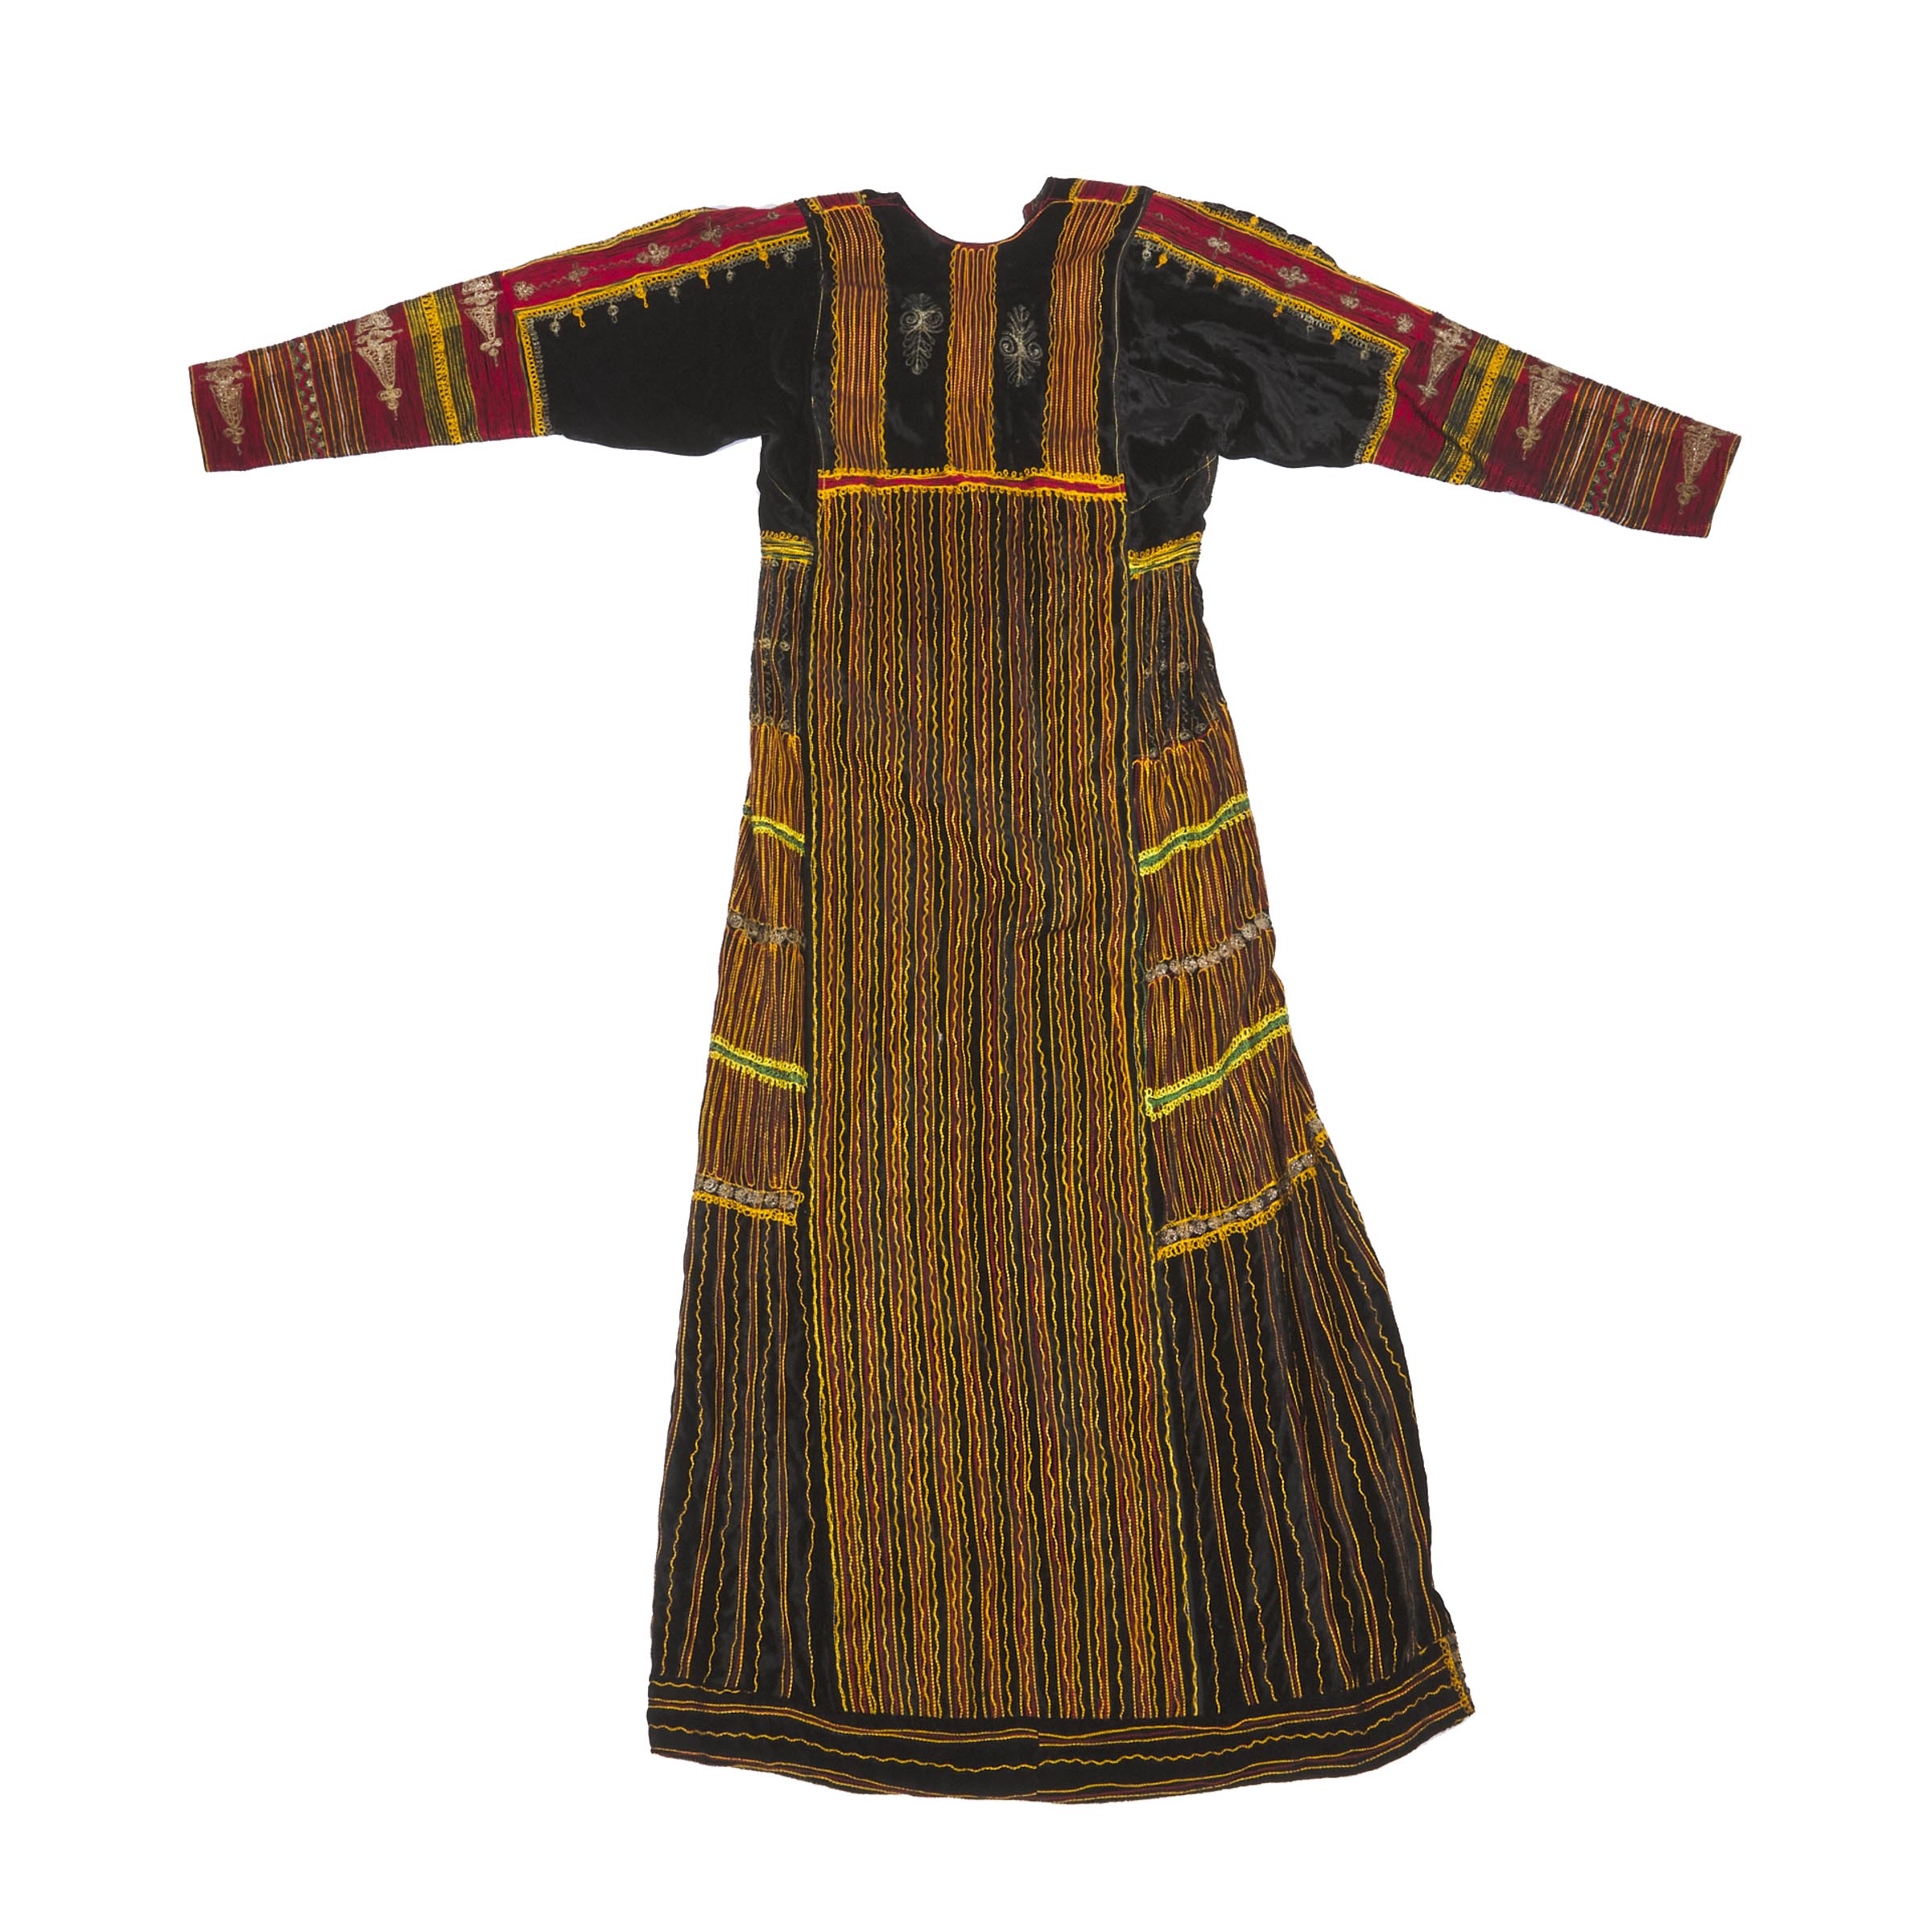 Central Asian Velvet Dress with silk and metallic threads, possibly Uzbek or Turkoman, mid 20th century